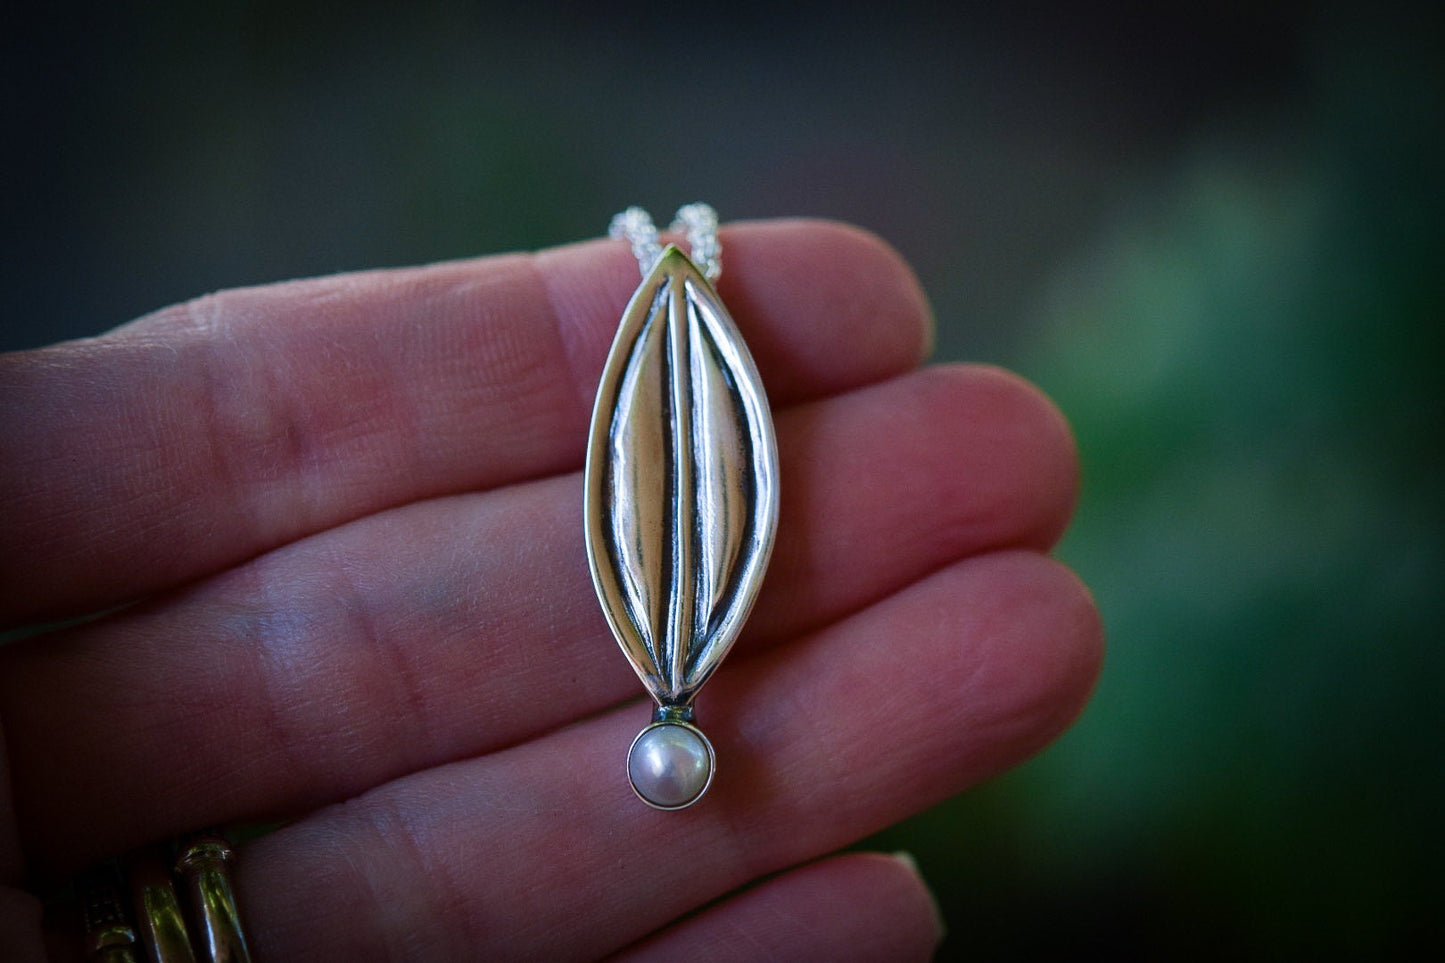 Leaf with Pearl Accent Necklace/ Sterling Silver